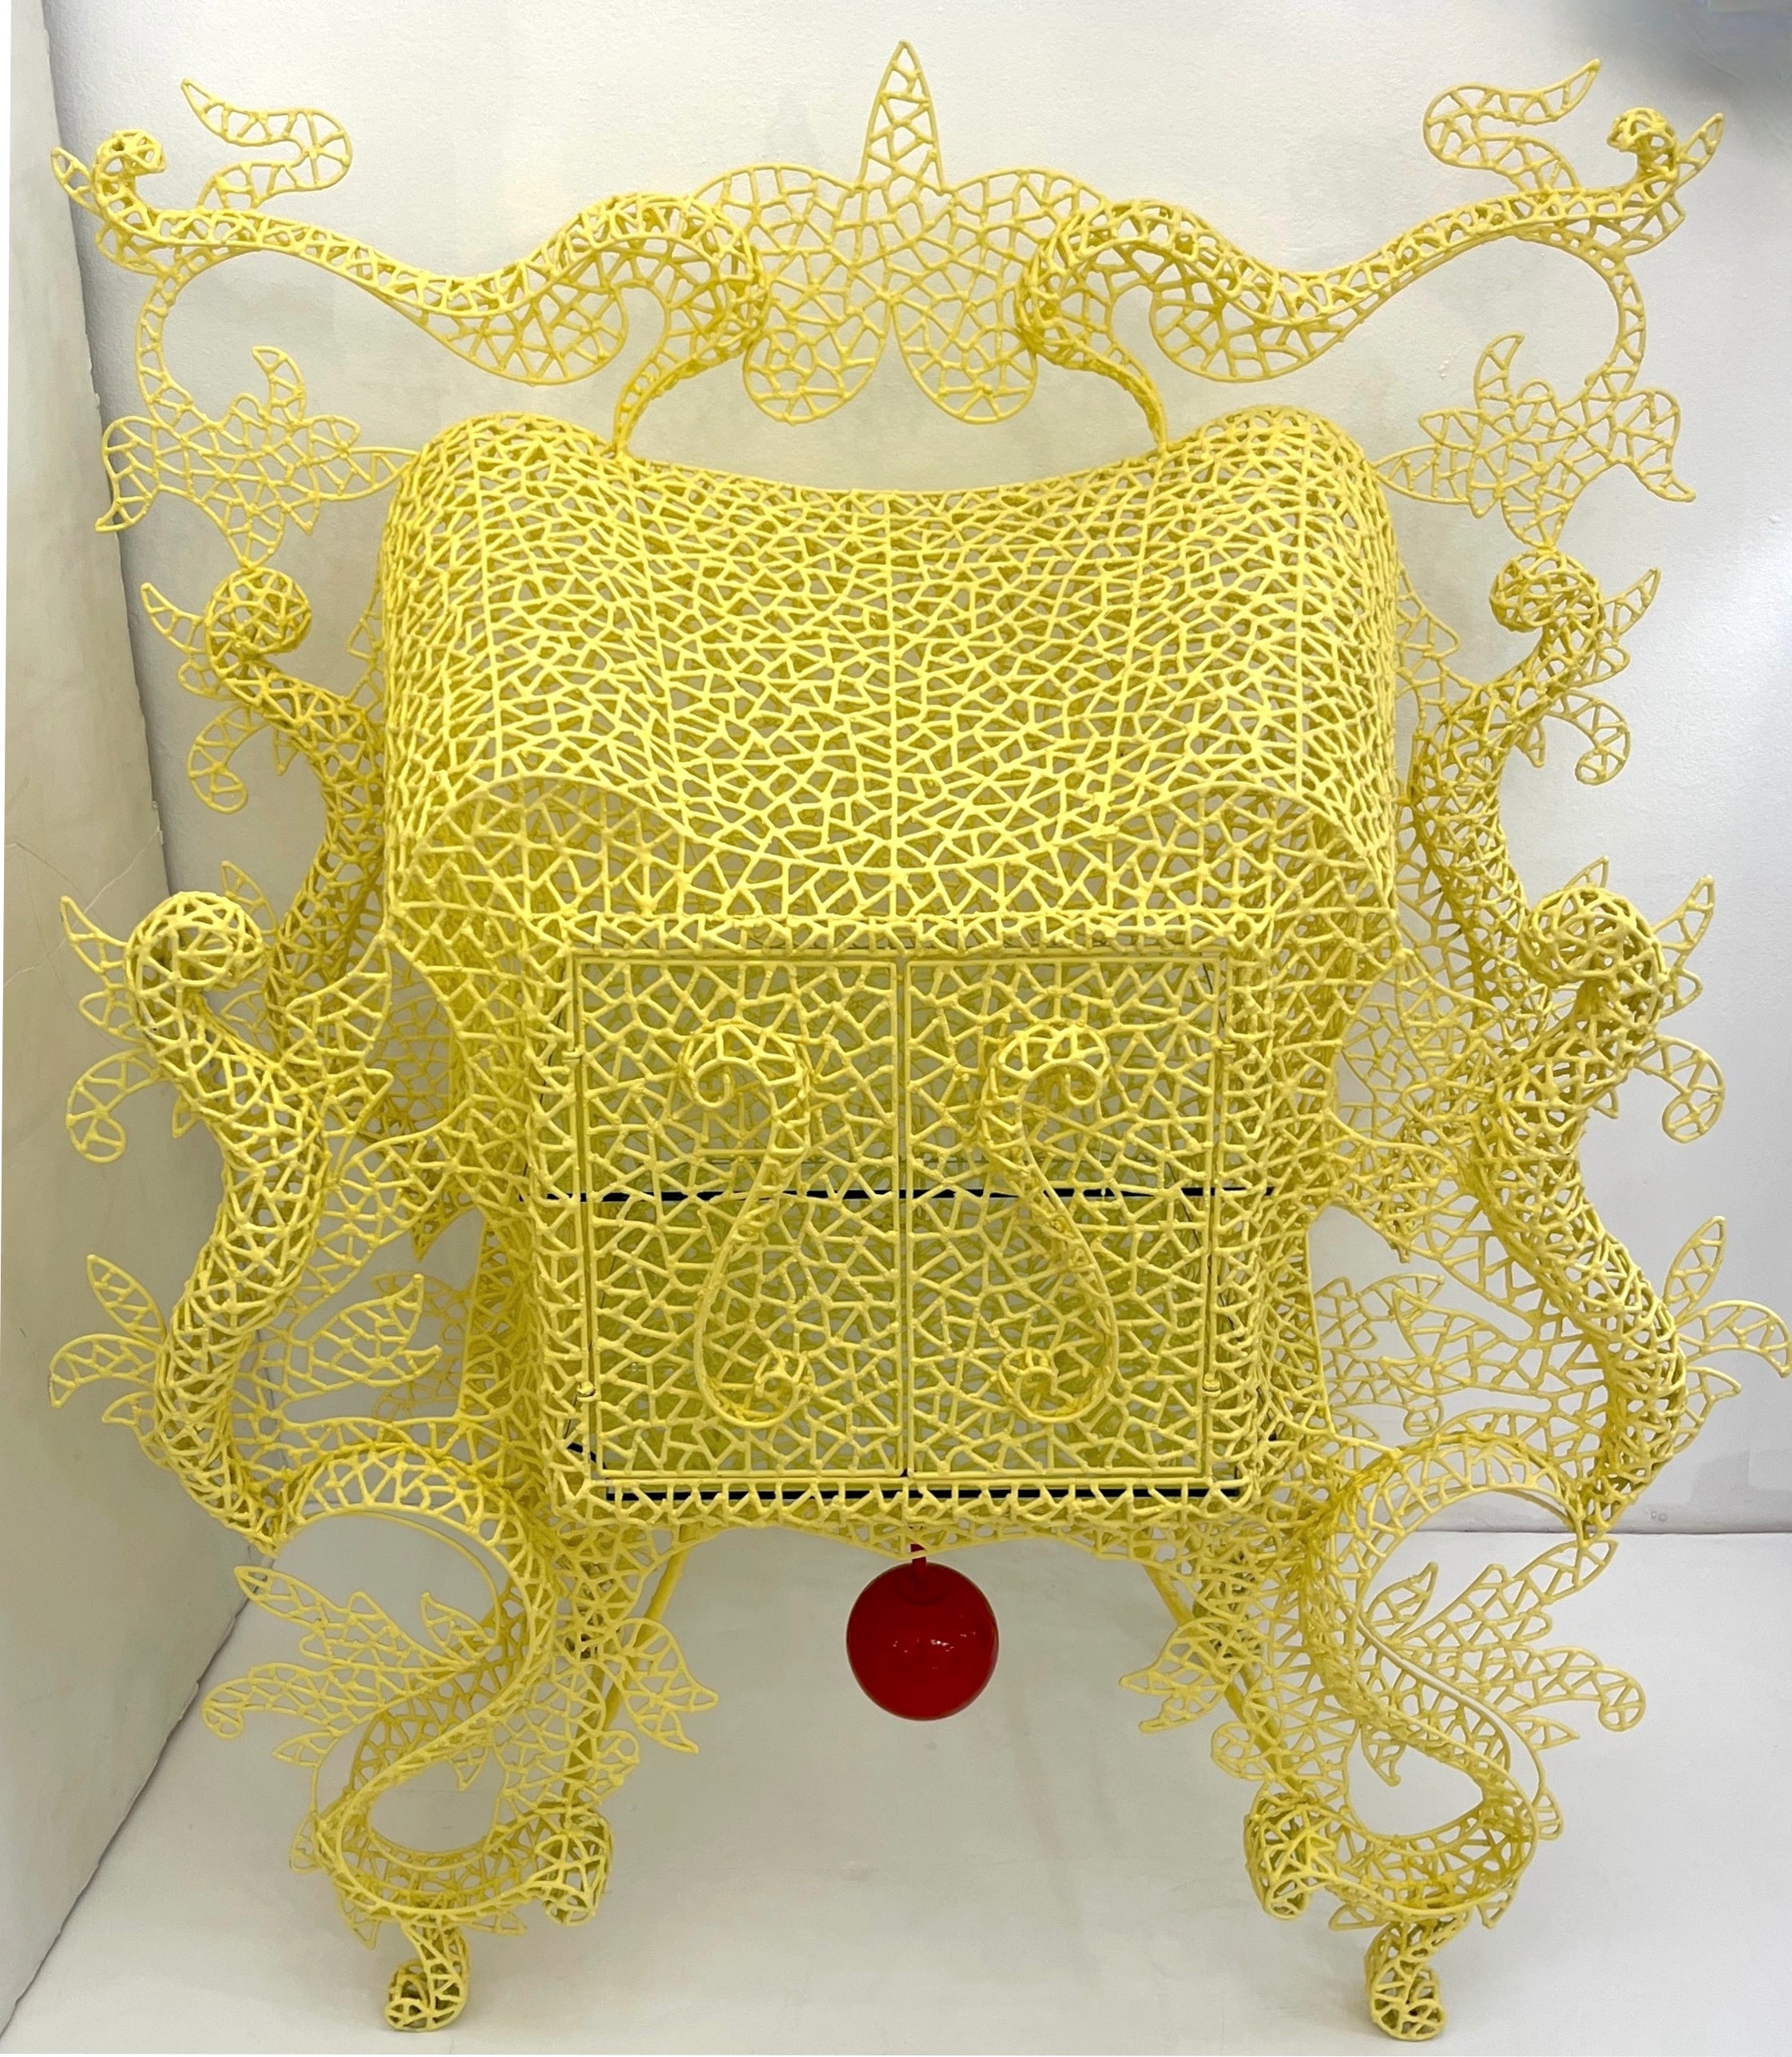 This sculptural lemon yellow metal cabinet is a fun, unique, and rare organic Modern Art Design cabinet, sculpted and signed AS - by the Italian artist, Anacleto Spazzapan (Luino, Italy - 1943). The handmade structure, consisting of hand-welded thin